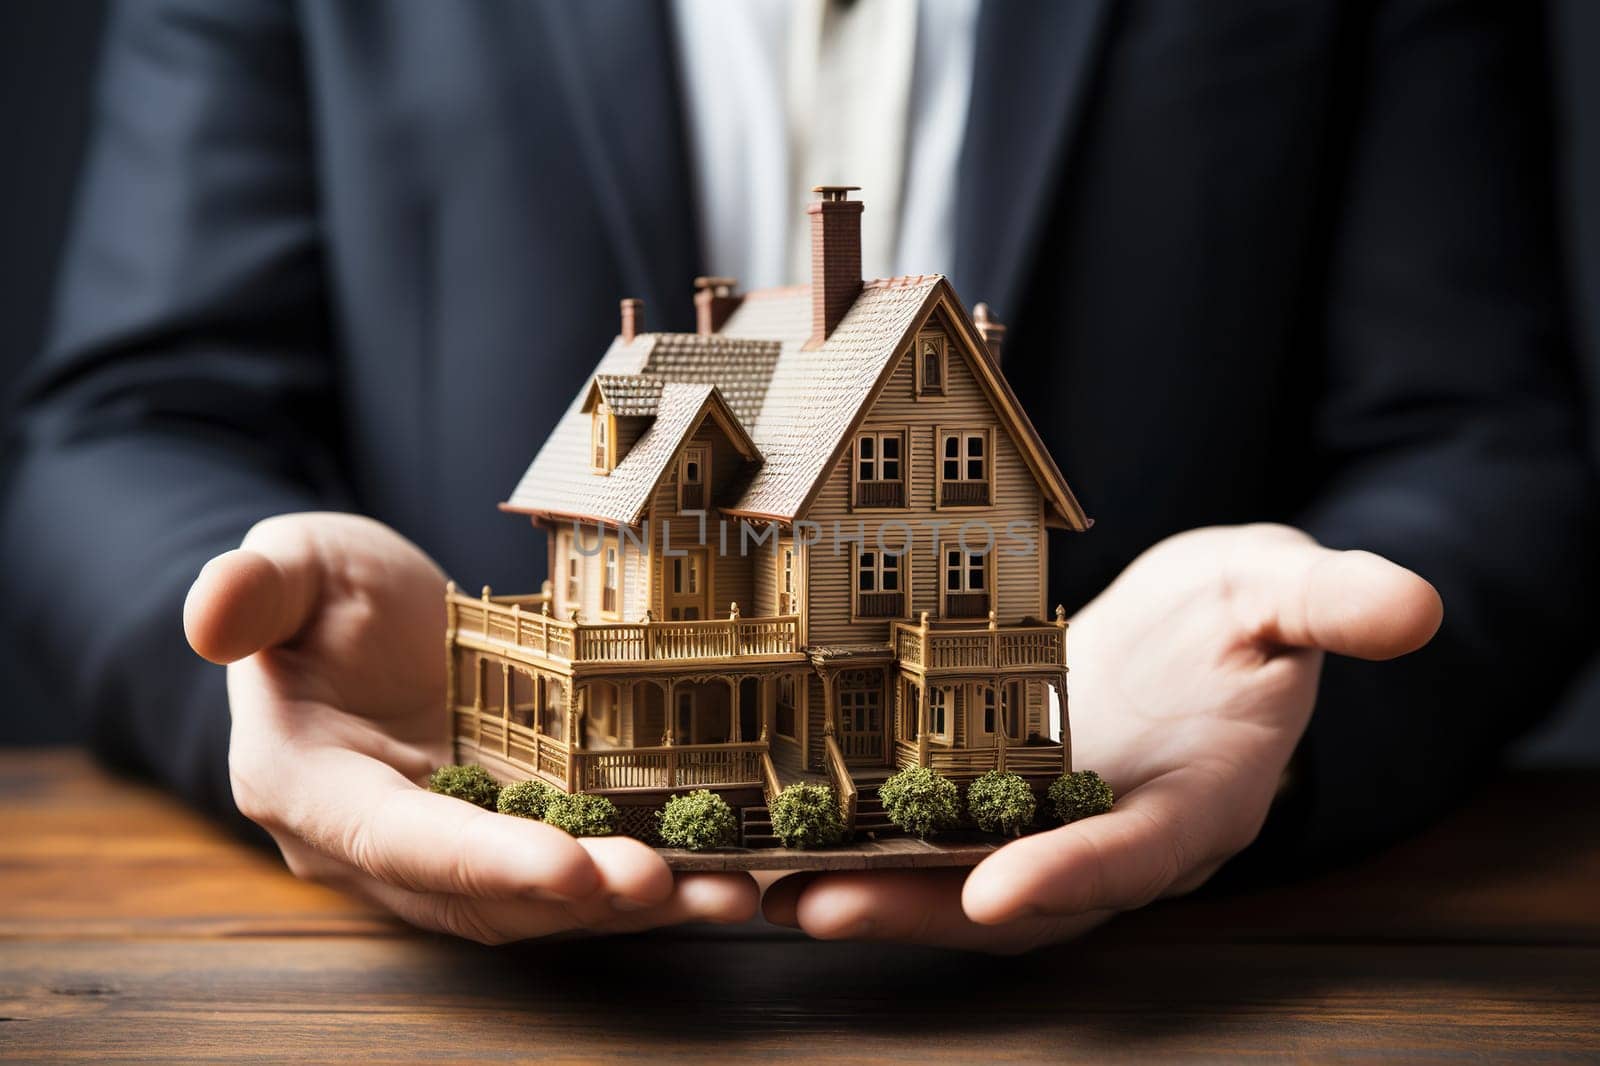 A model of a house in the hands of a man in a business suit. The concept of purchasing, building housing.